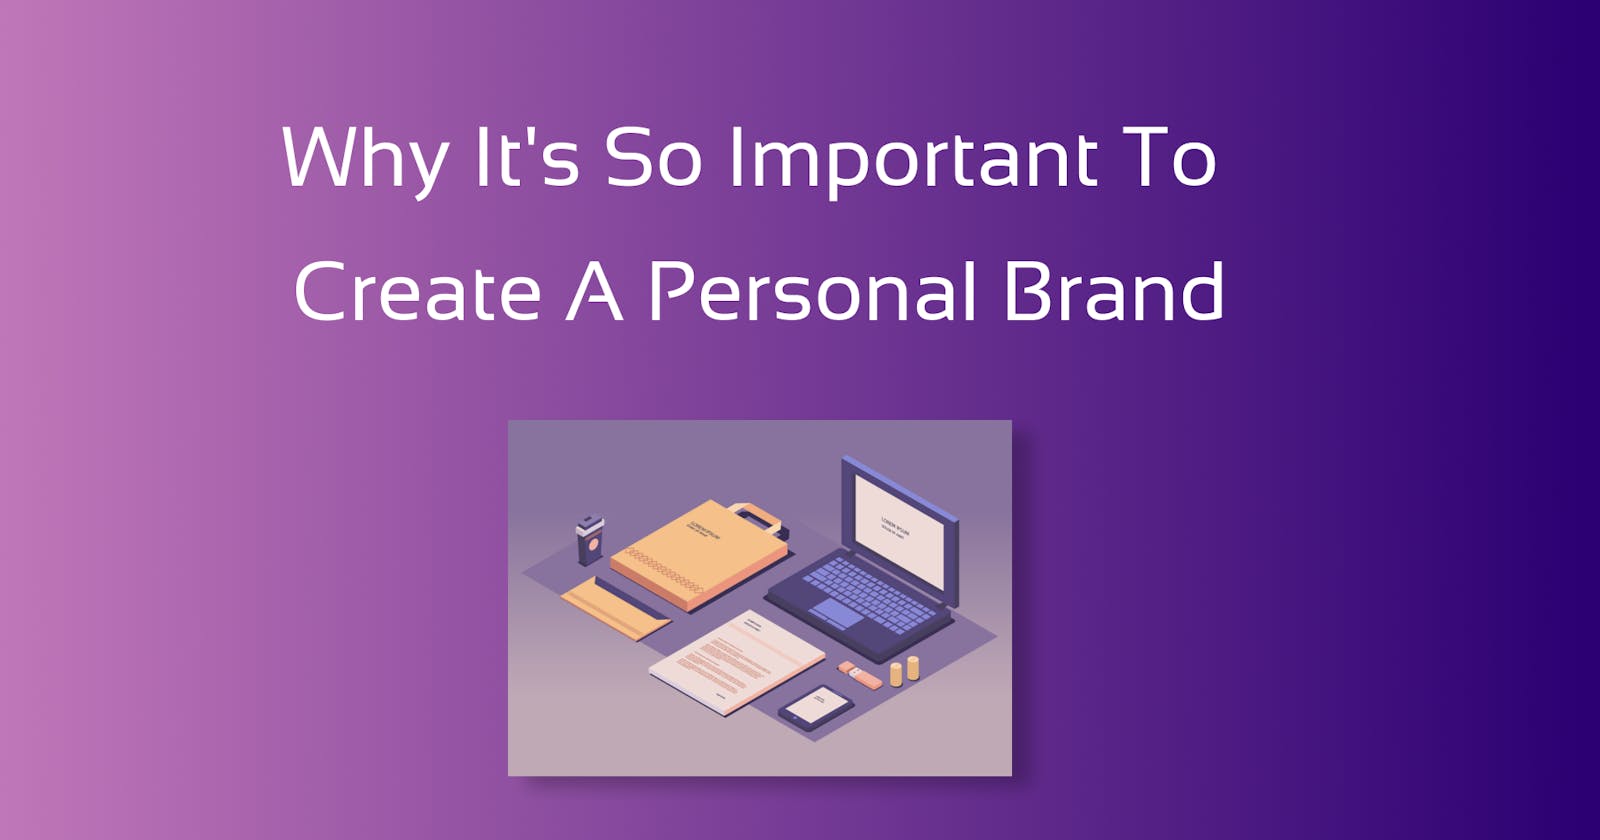 Why it's so important to create a personal brand